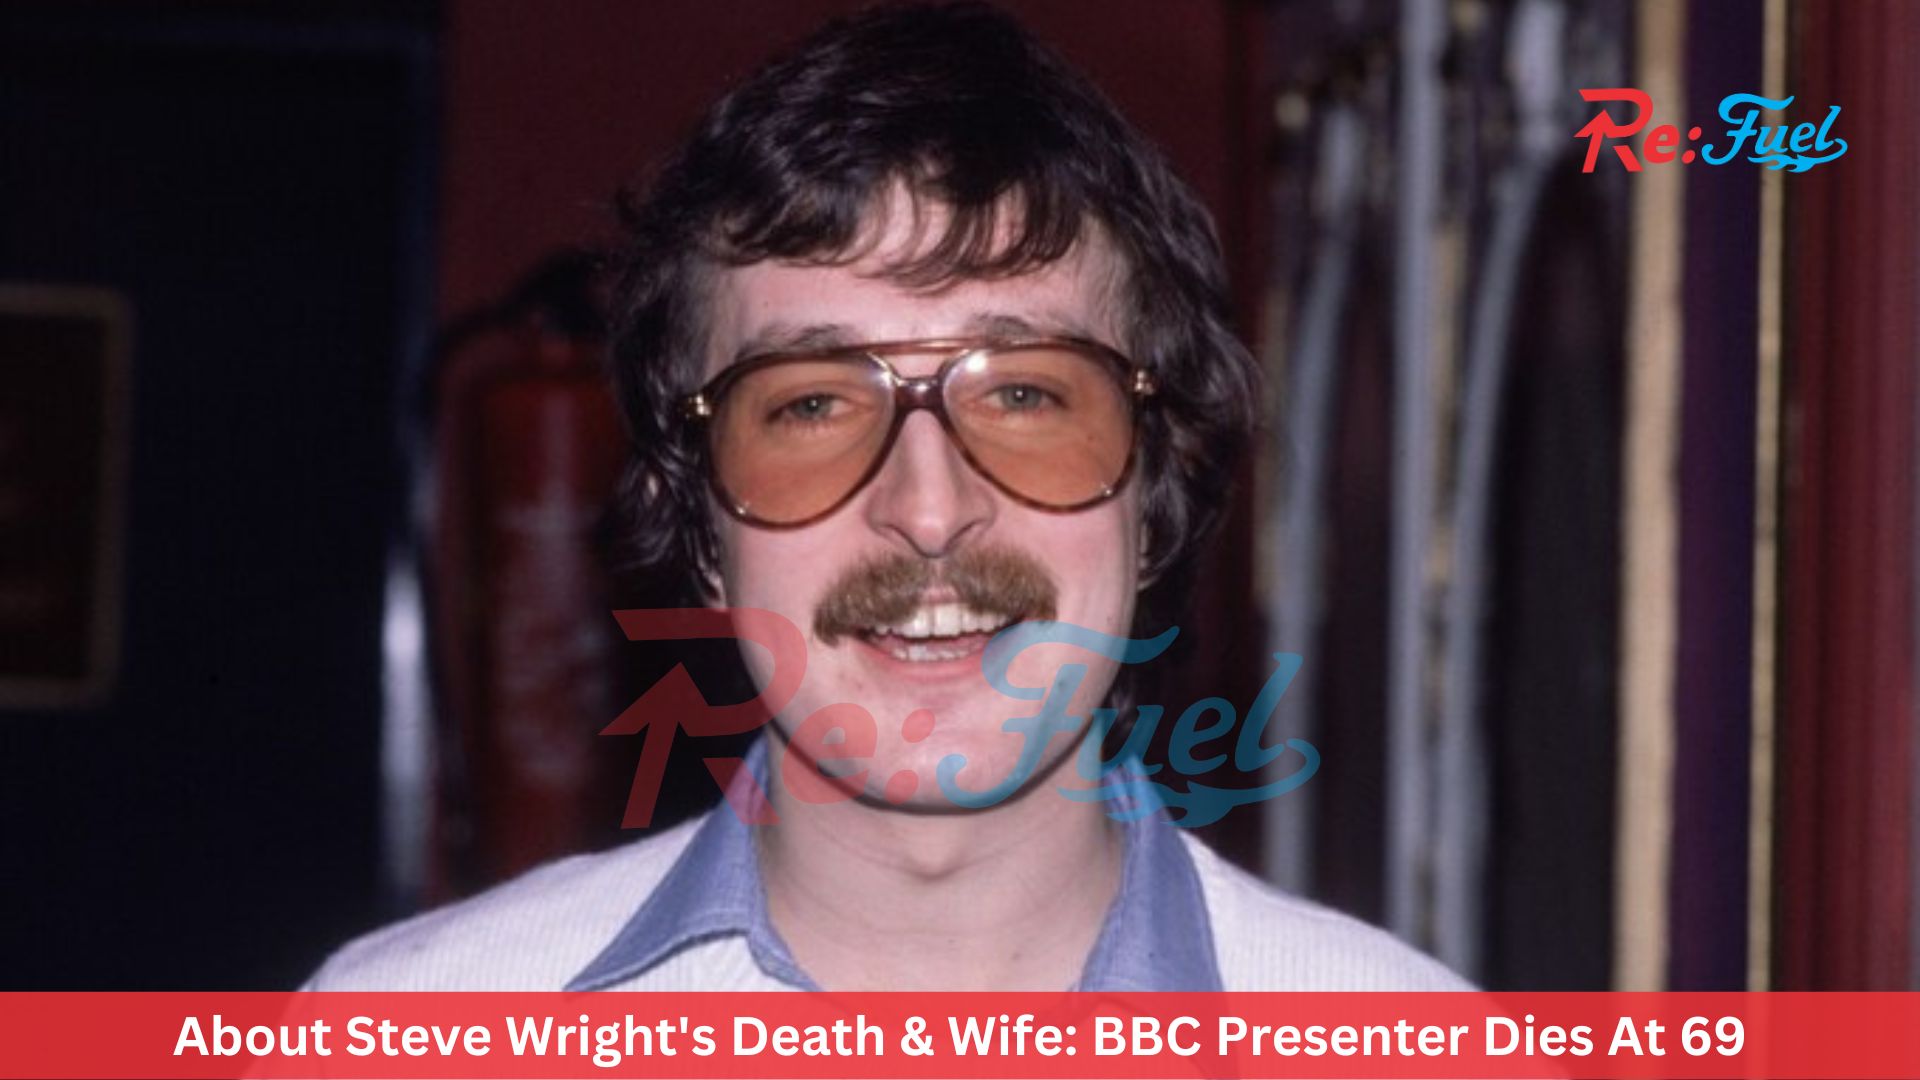 About Steve Wright's Death & Wife: BBC Presenter Dies At 69